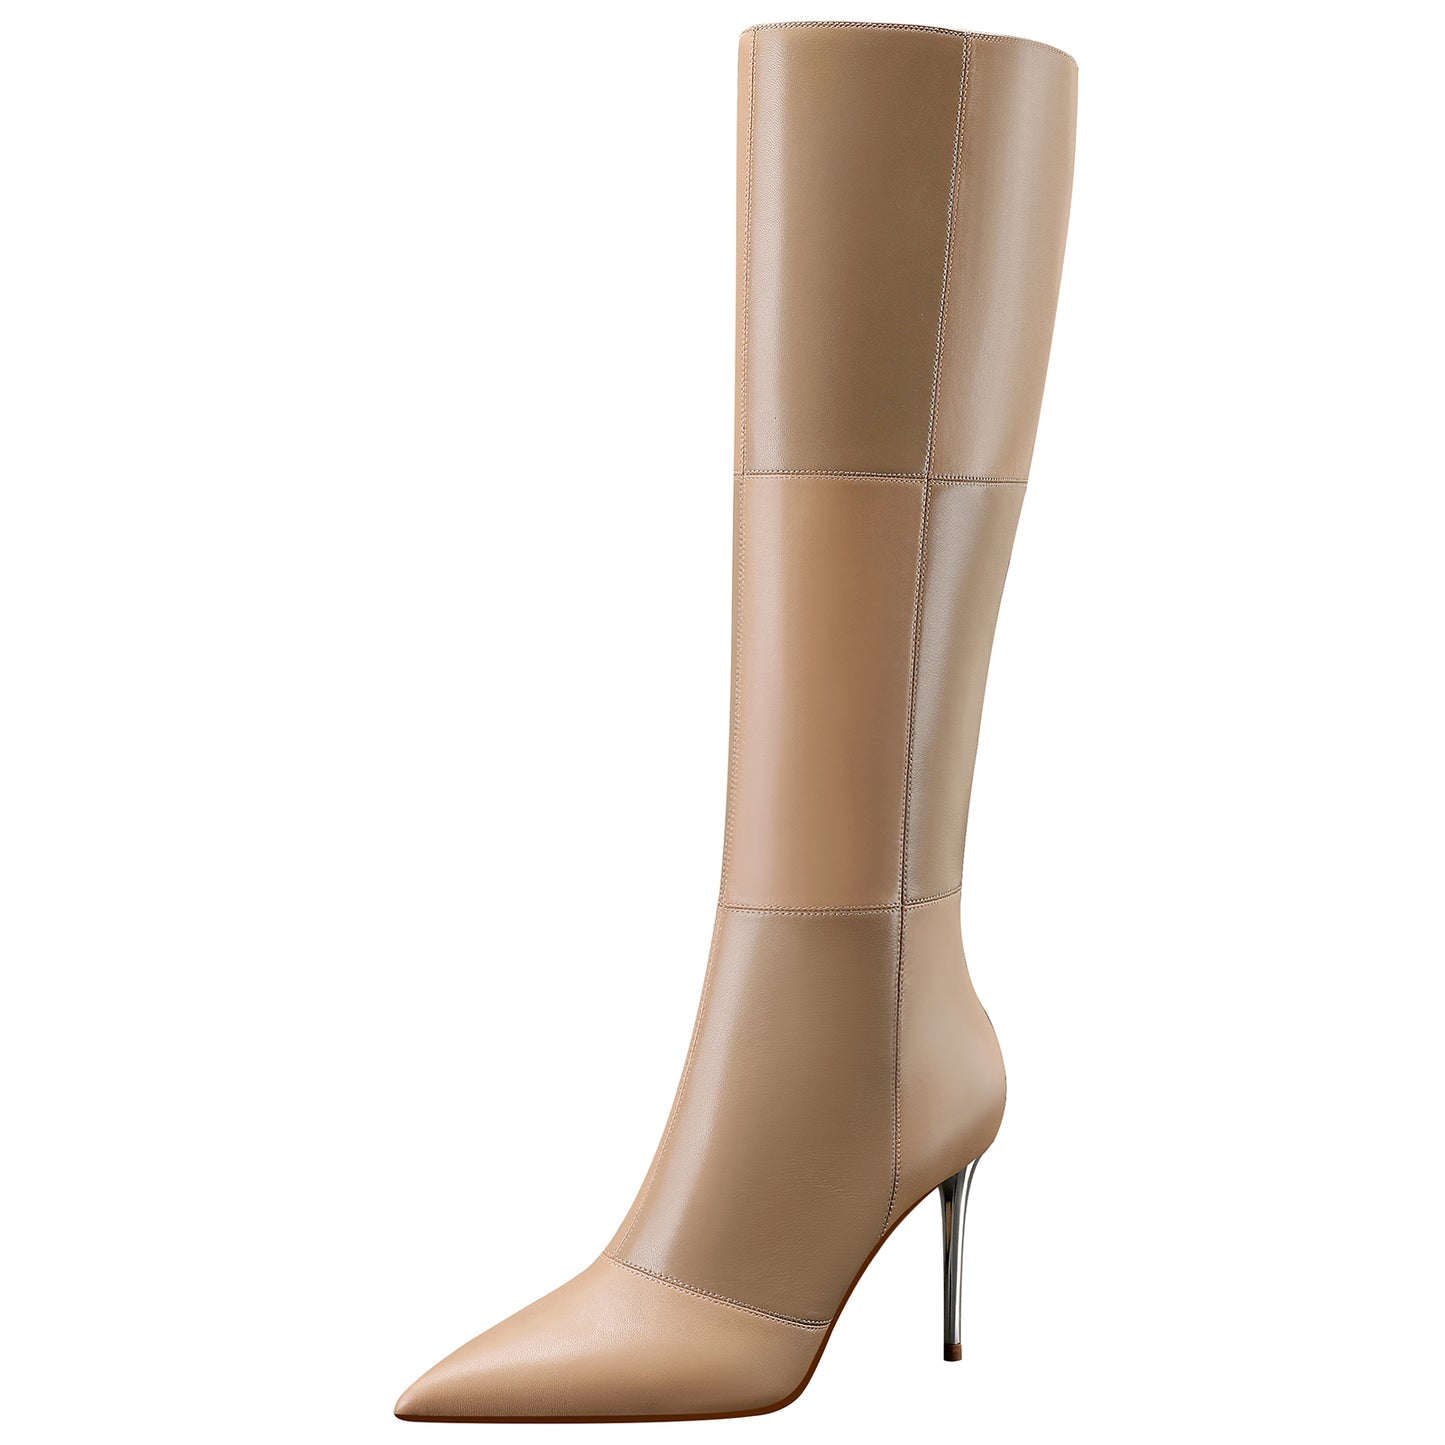 High Heels Boots, Zipper Tall Boots Leather Pointed Toe Stitching